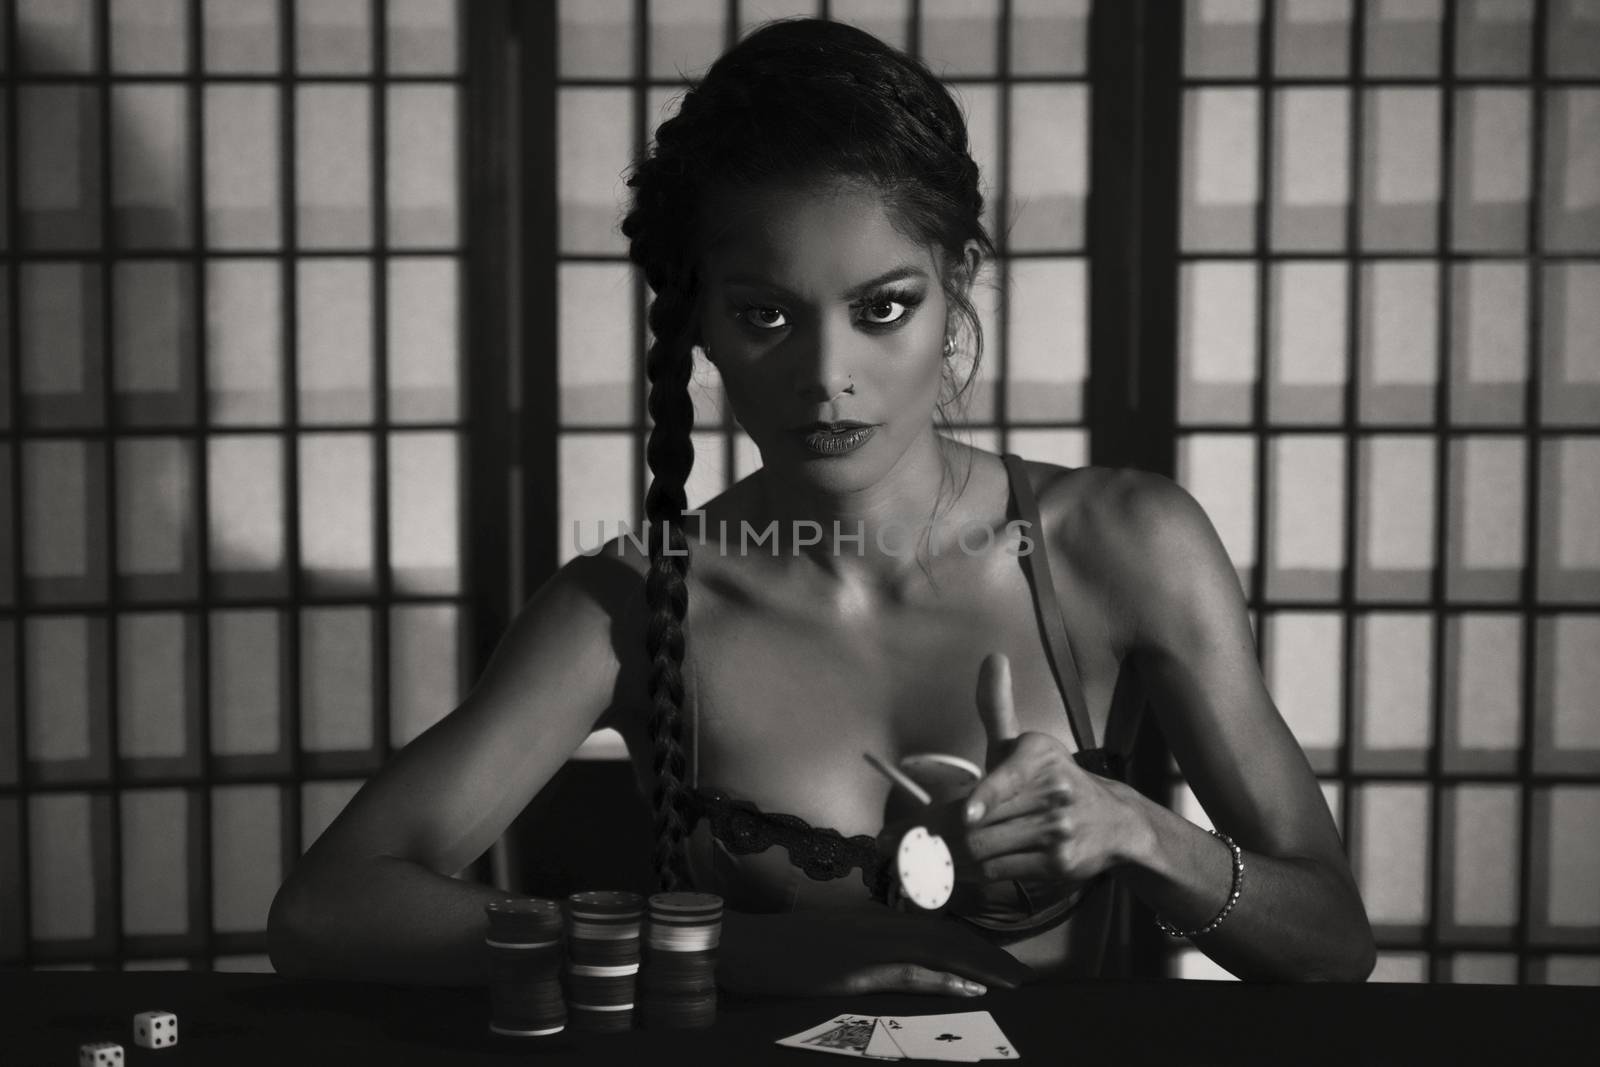 Concept: A beautiful high stakes poker player is winning big and feeling sensual and confident. Cinematic portrait. Black and white image.